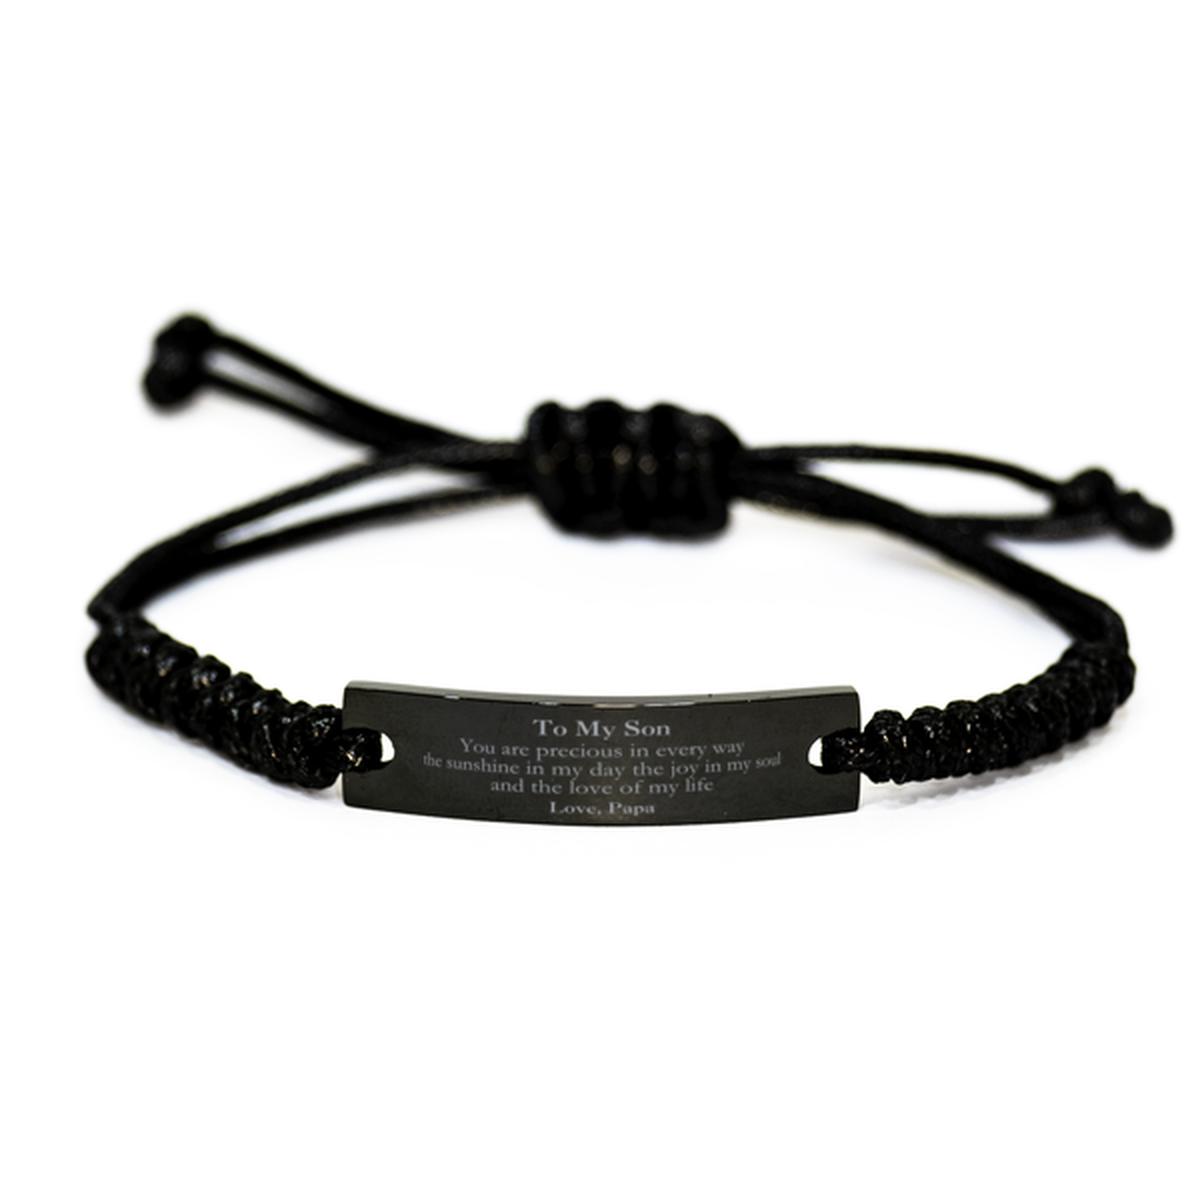 Graduation Gifts for Son Black Rope Bracelet Present from Papa, Christmas Son Birthday Gifts Son You are precious in every way the sunshine in my day. Love, Papa